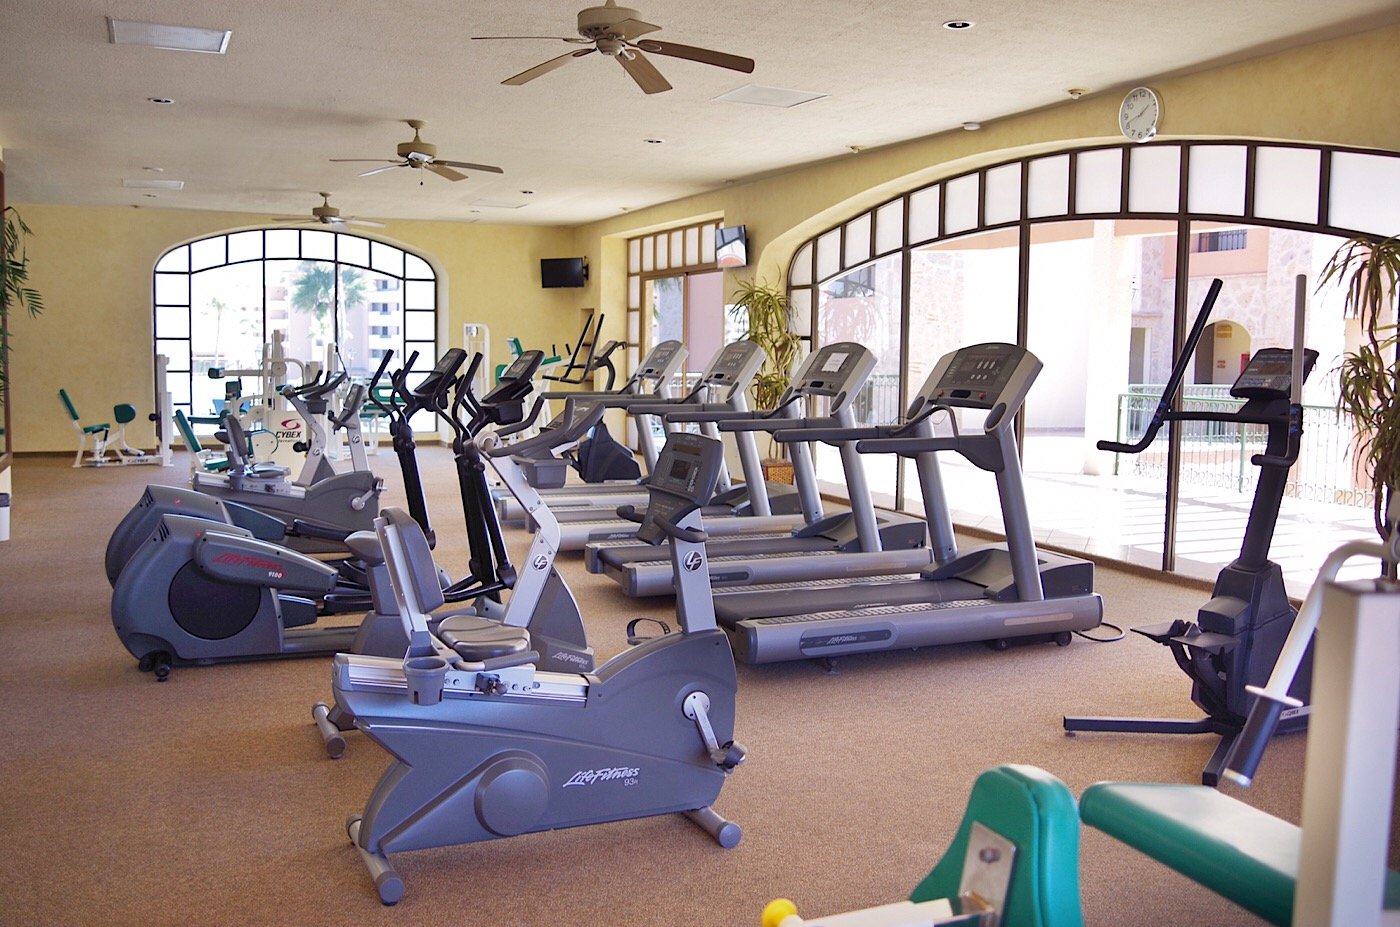 This gyn has tread mills, a variety of machines, as well as dumbbell set